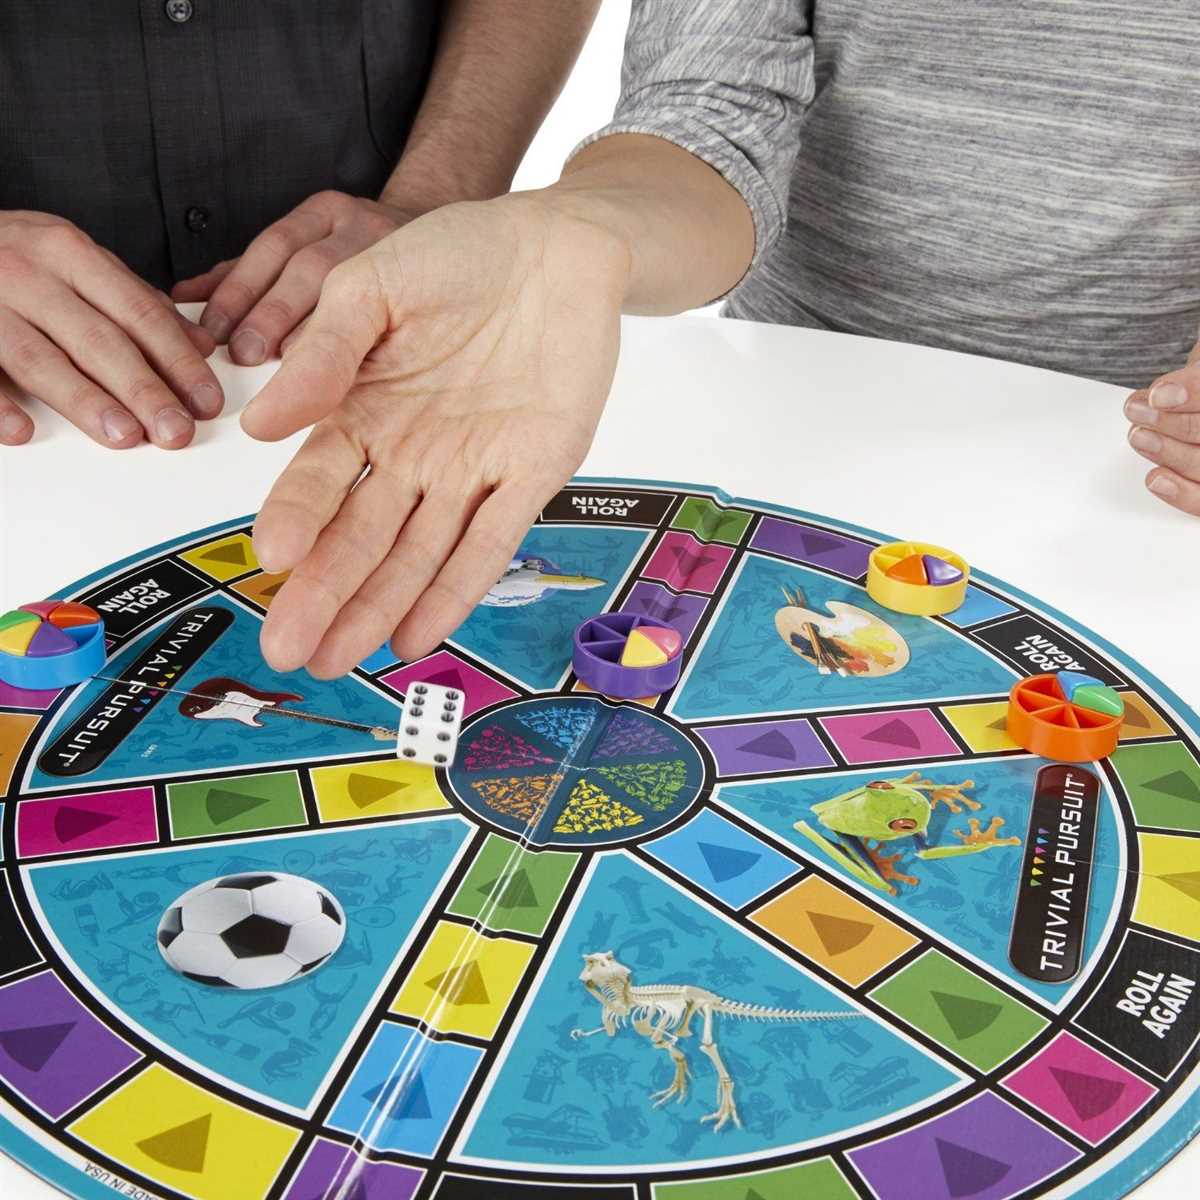 Searching for Badgehungry Trivial Pursuit Answers: Tips and Tricks